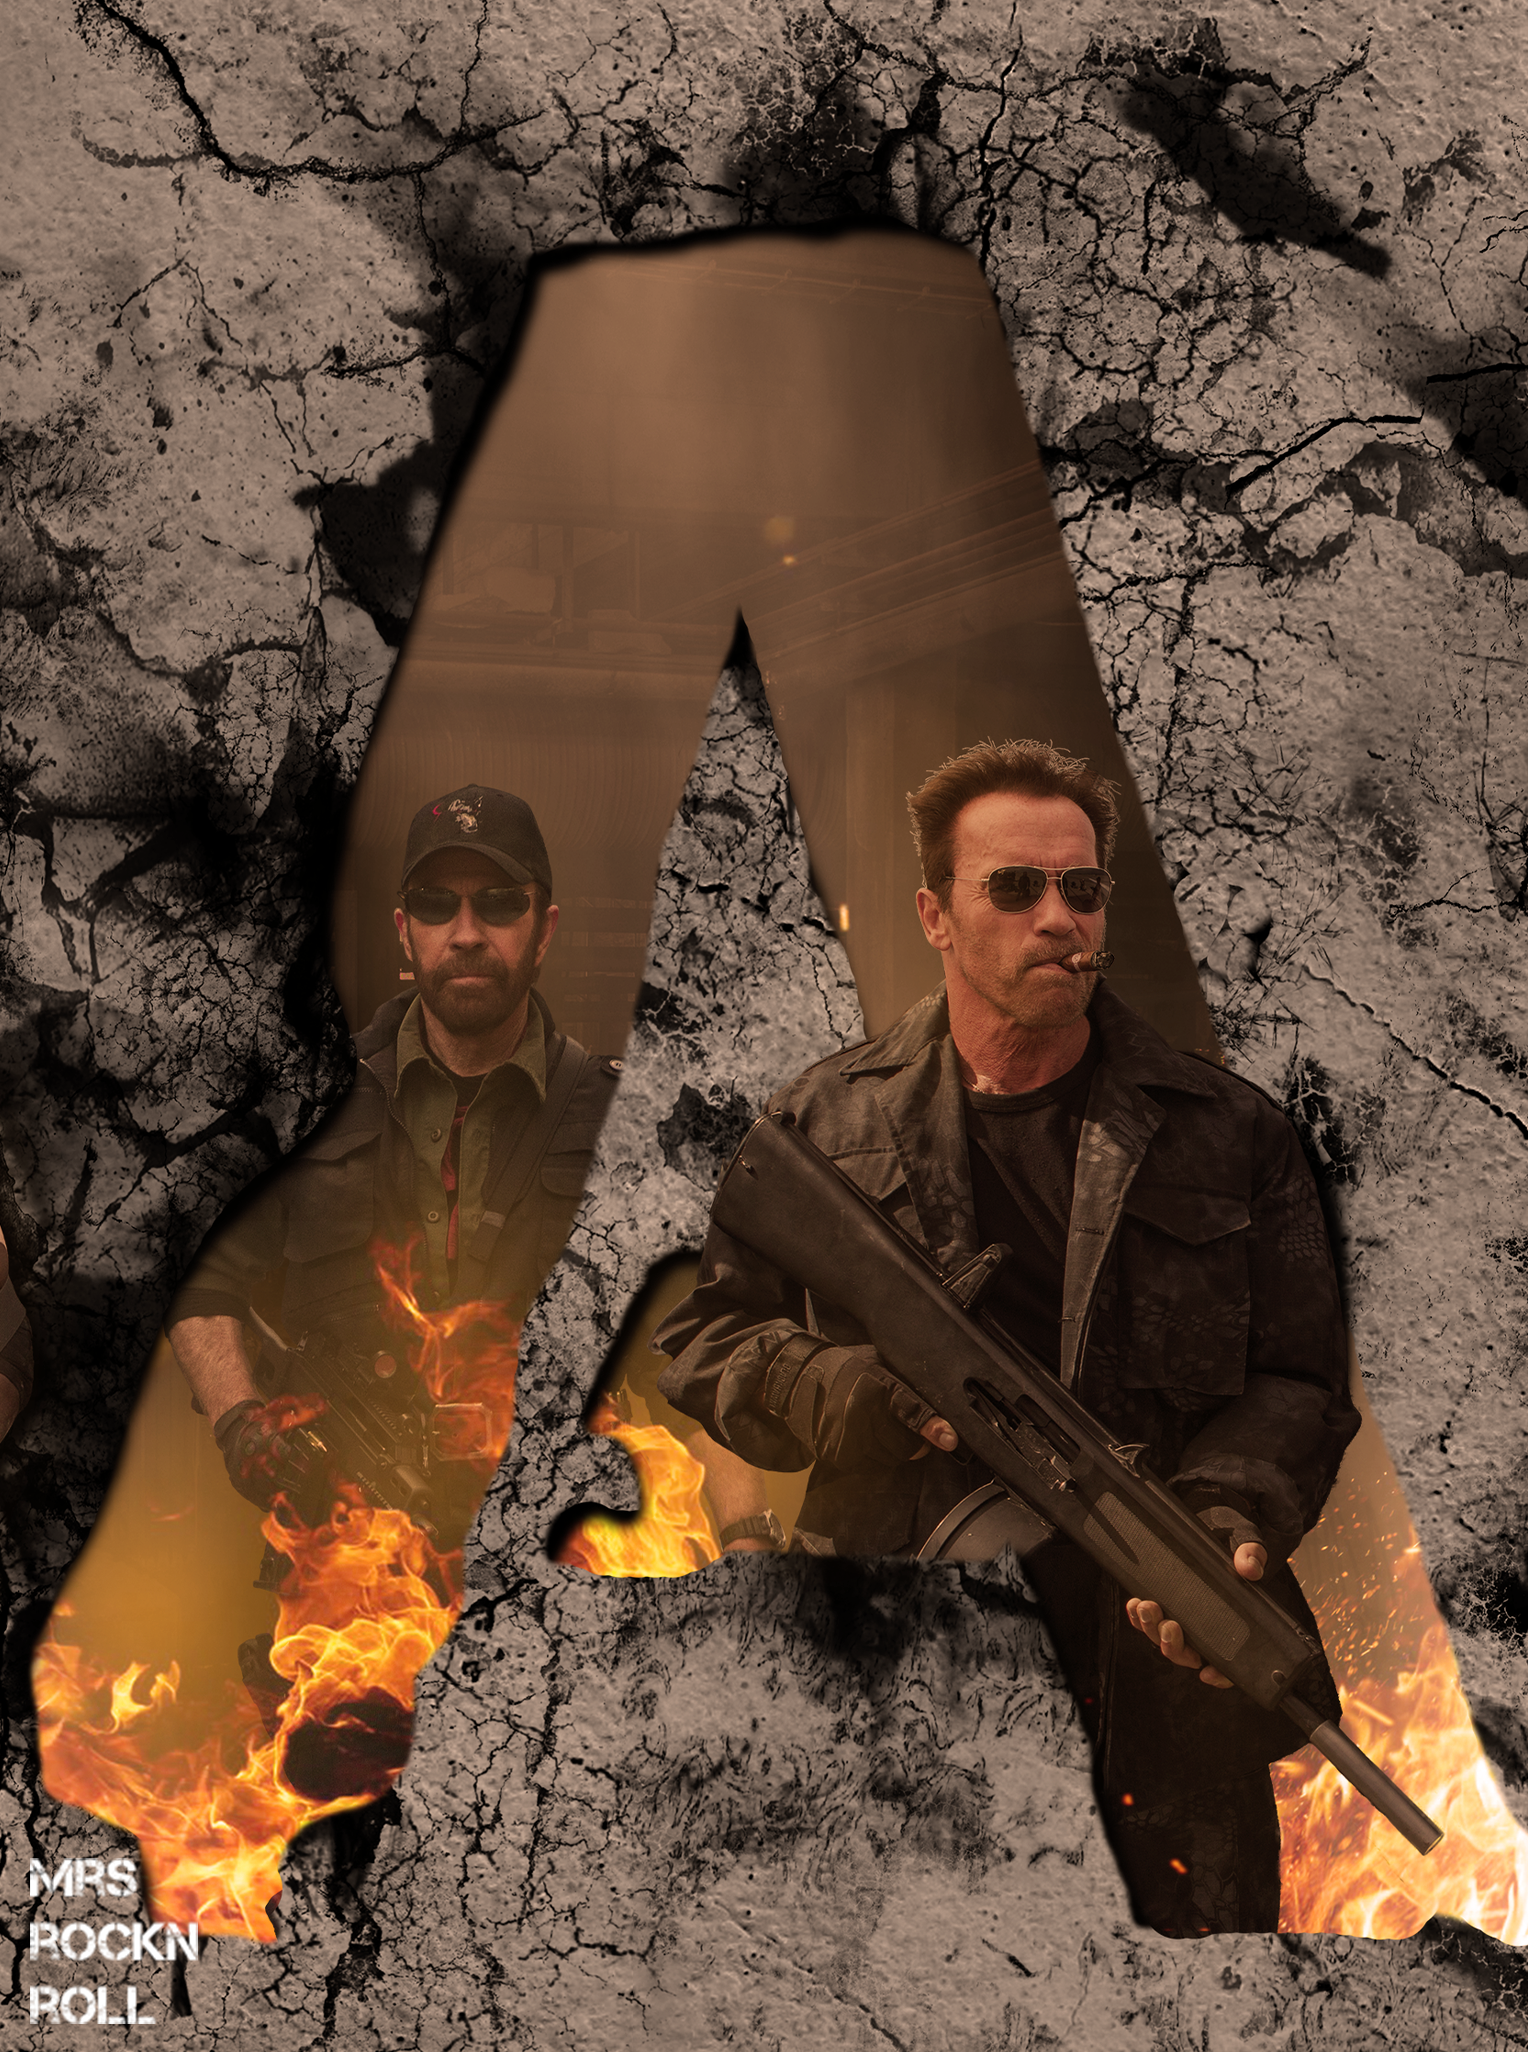 Chuck Norris and Schwarzenegger, Booker and Trench from The Expendables (Piece A of the Panorama) by Mrs_RockNRoll